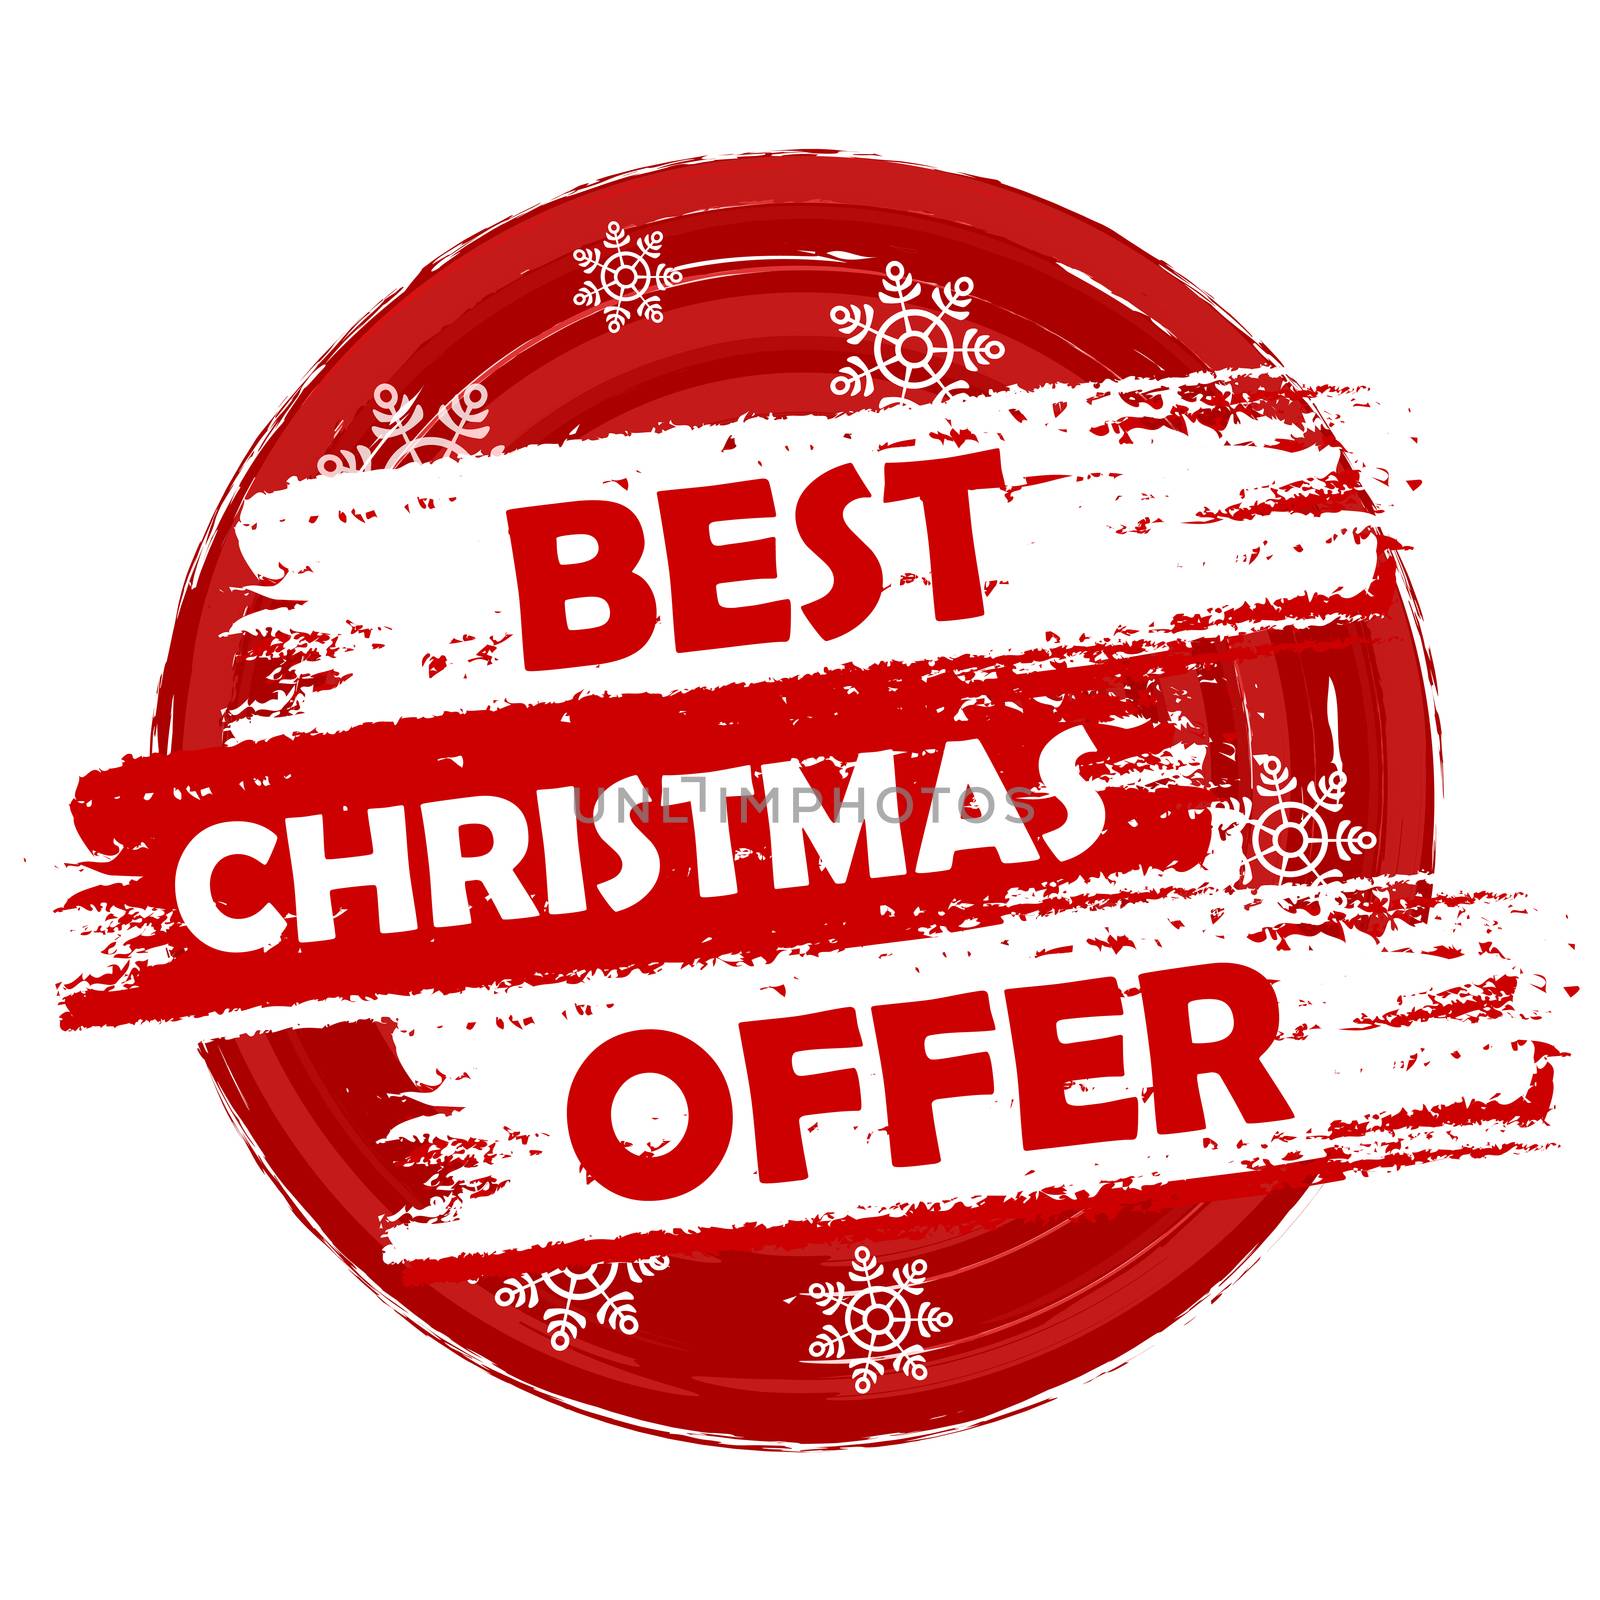 Best Christmas Offer by marinini